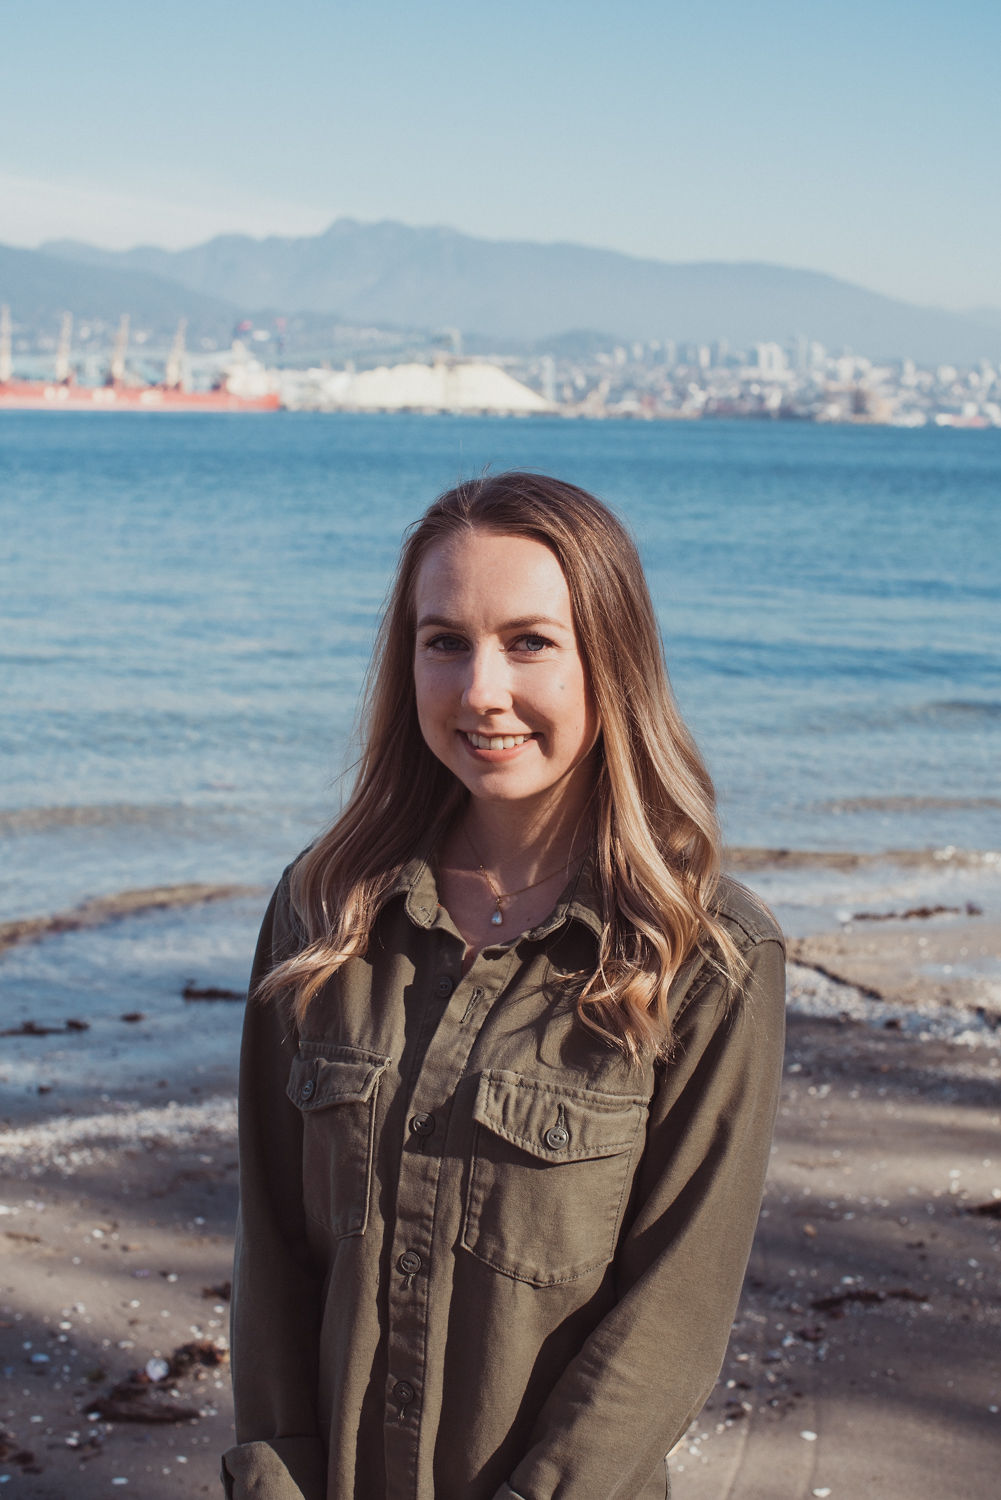 A woman with brown hair wearing a brown button up shirt poses for a picture on the beach with a body of water, a skyline and mountains in the background.